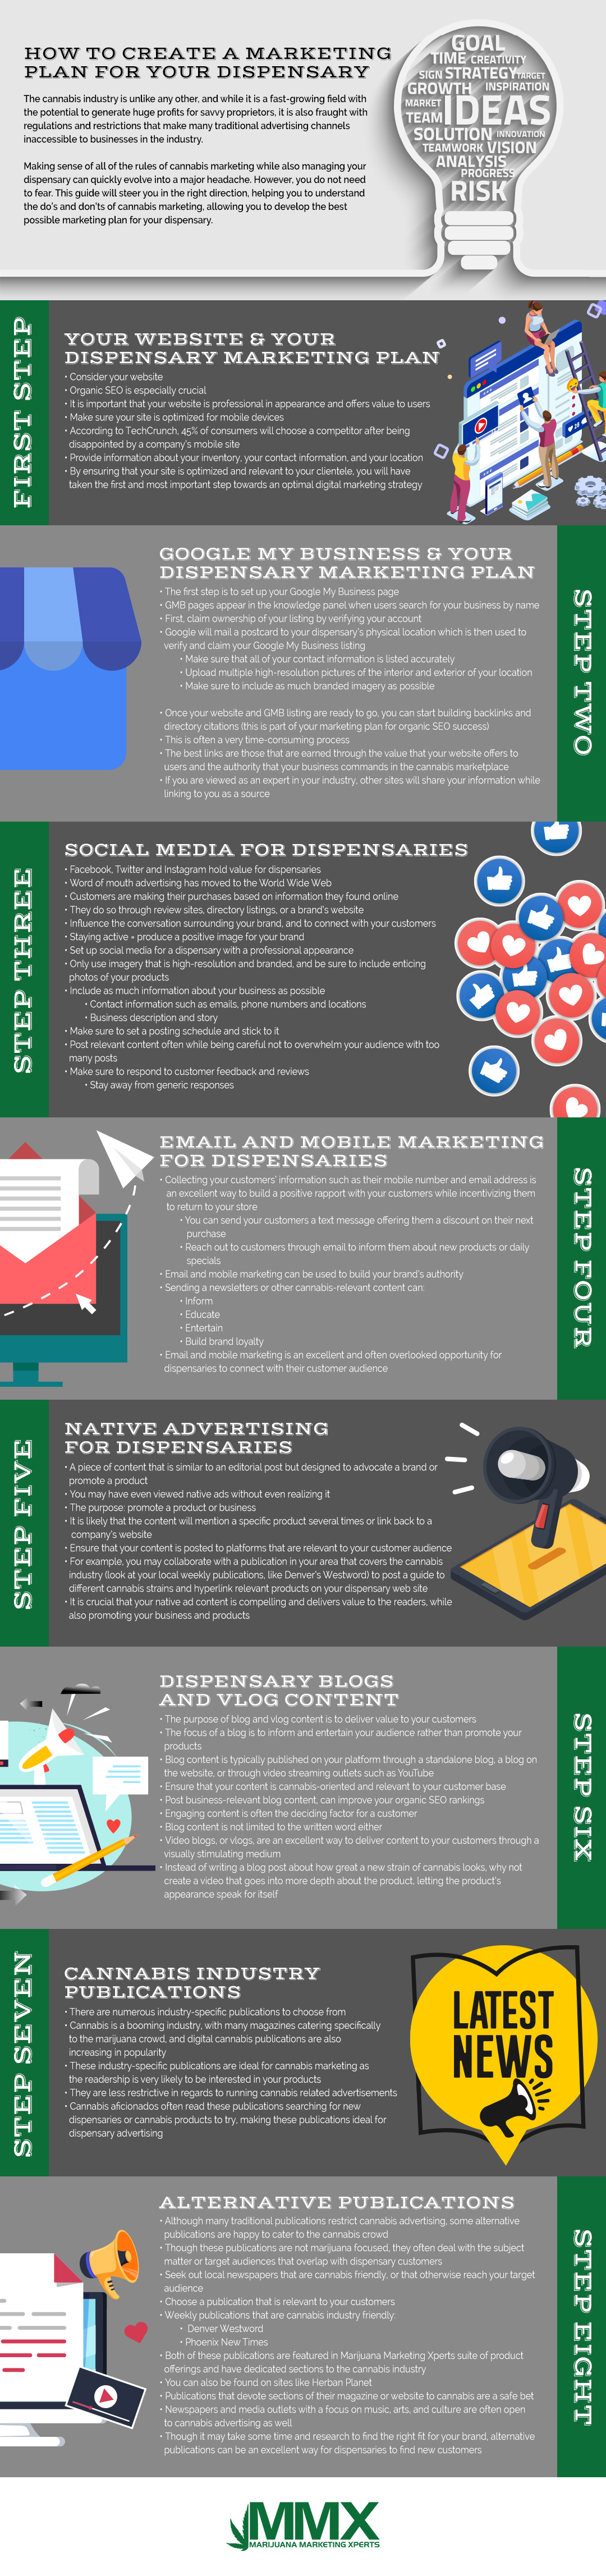 How to create a marketing plan for your dispensary infographic - Marijuana Marketing Xperts